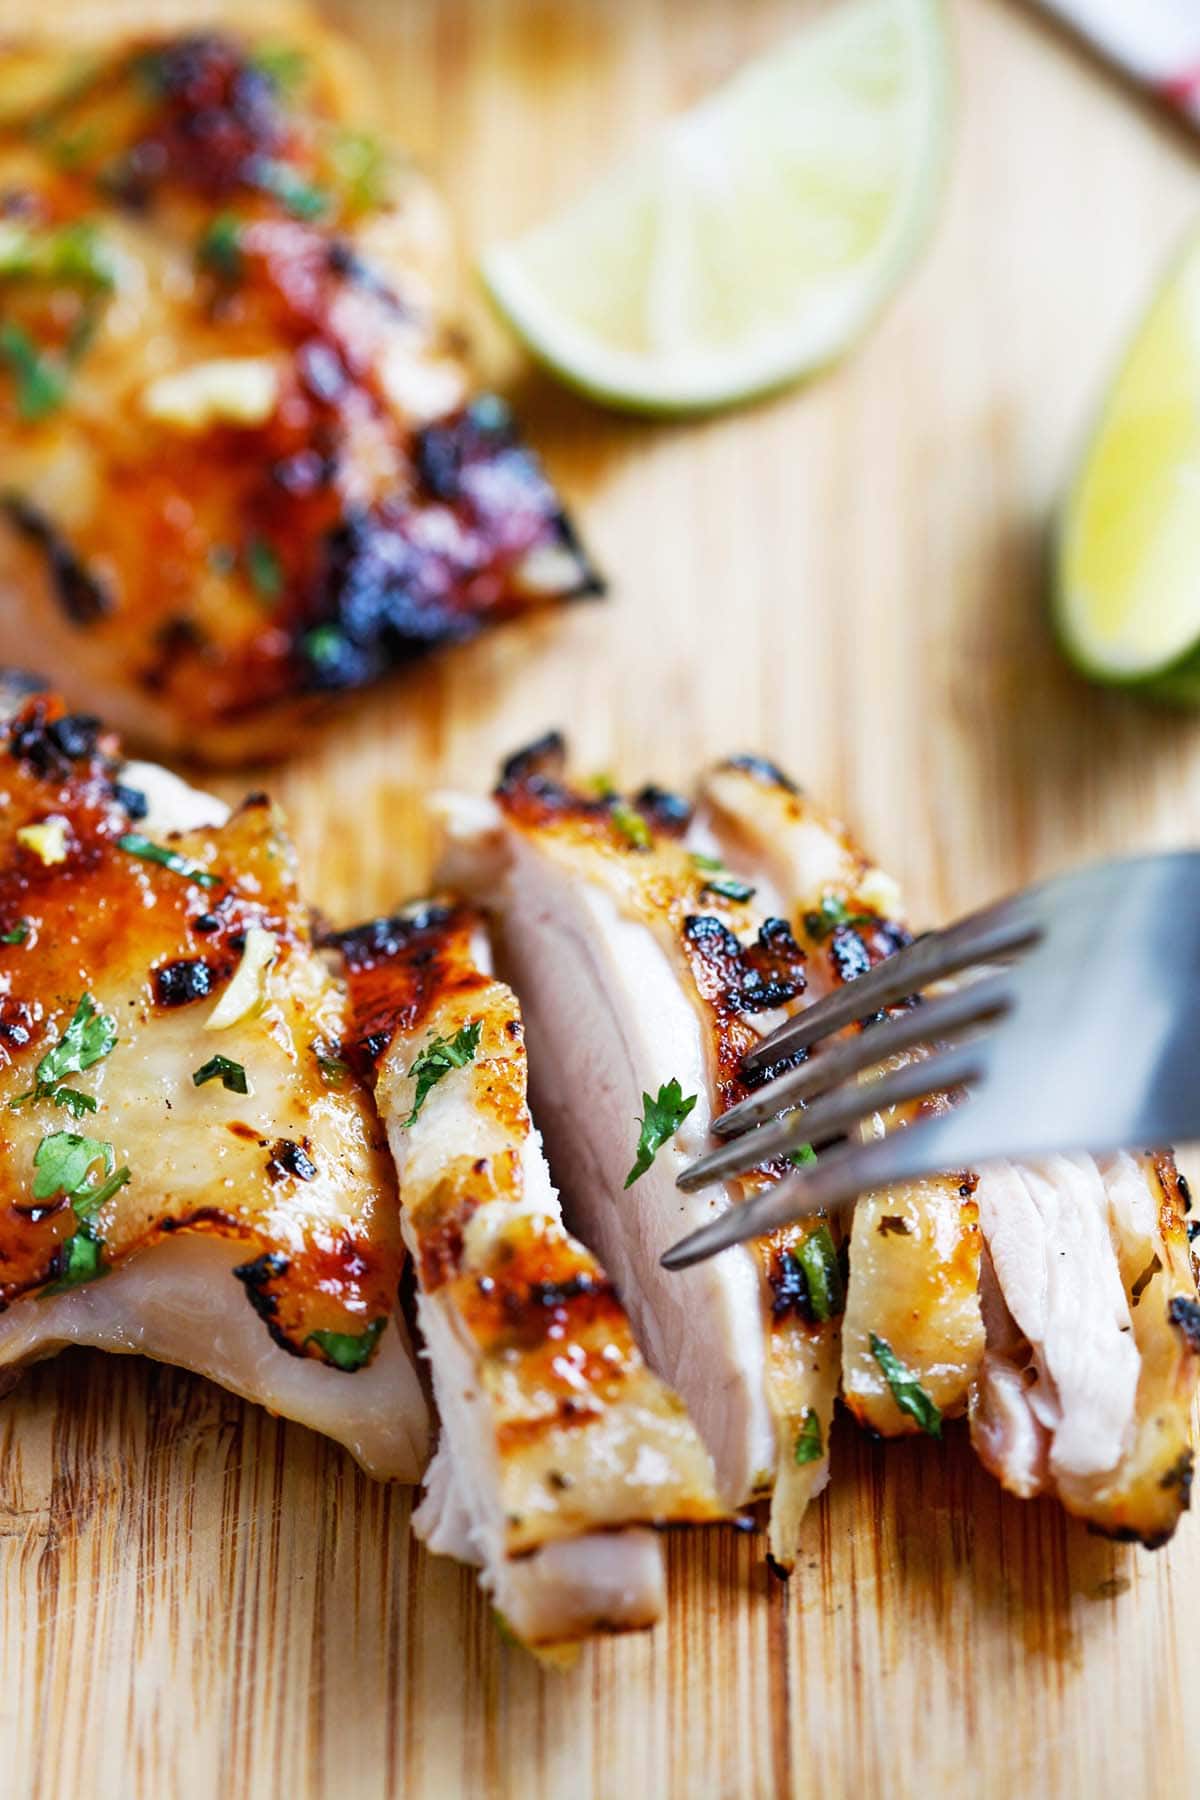 Asian style Chili lime chicken featuring grilled chciken sliced and ready to serve on a wooden chopping board.